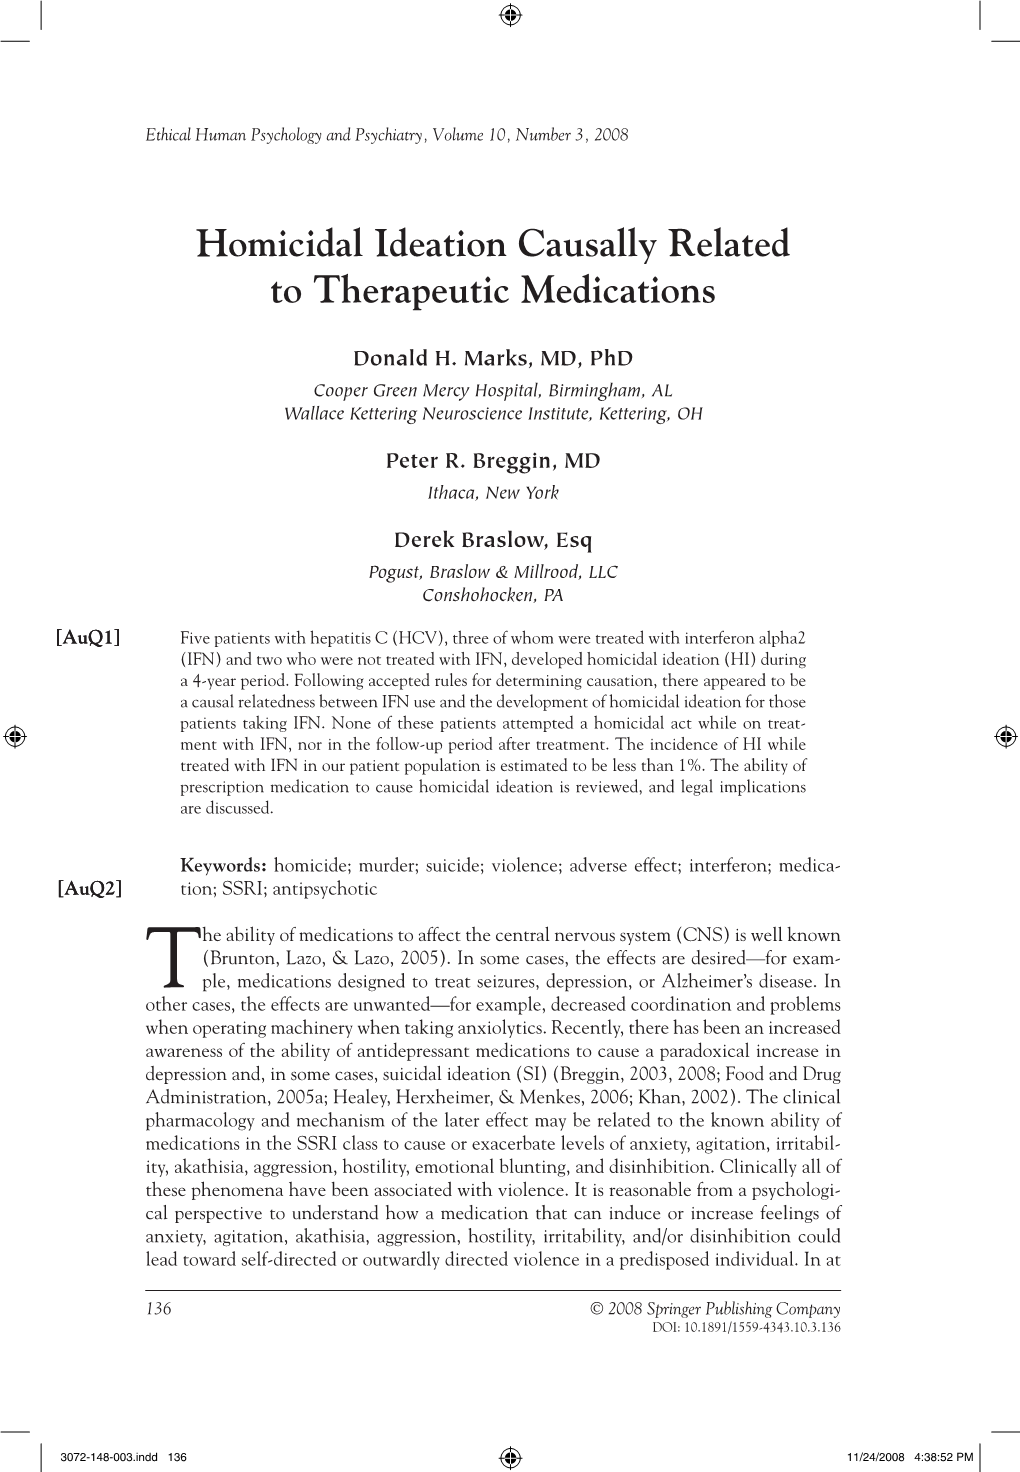 Homicidal Ideation Causally Related to Therapeutic Medications